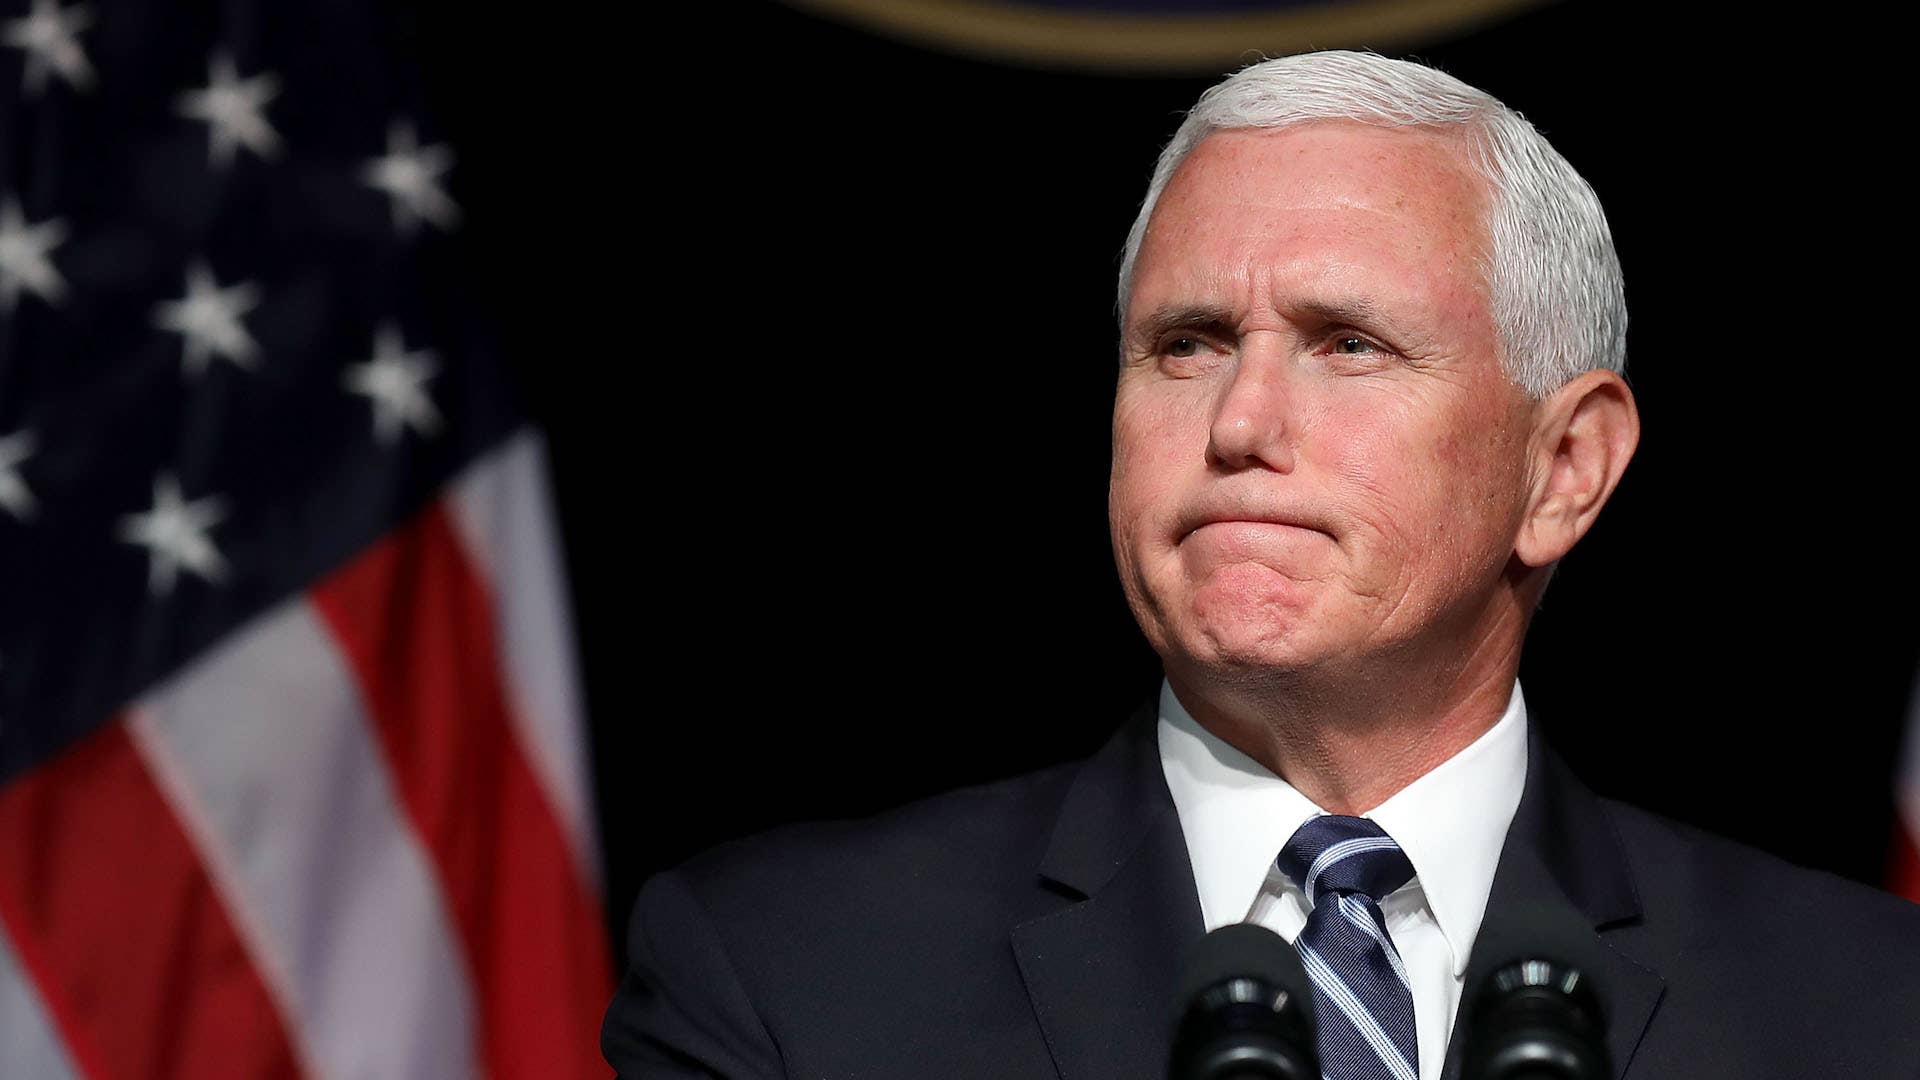 Mike Pence announces the Trump Administration's plan to create the U.S. Space Force.